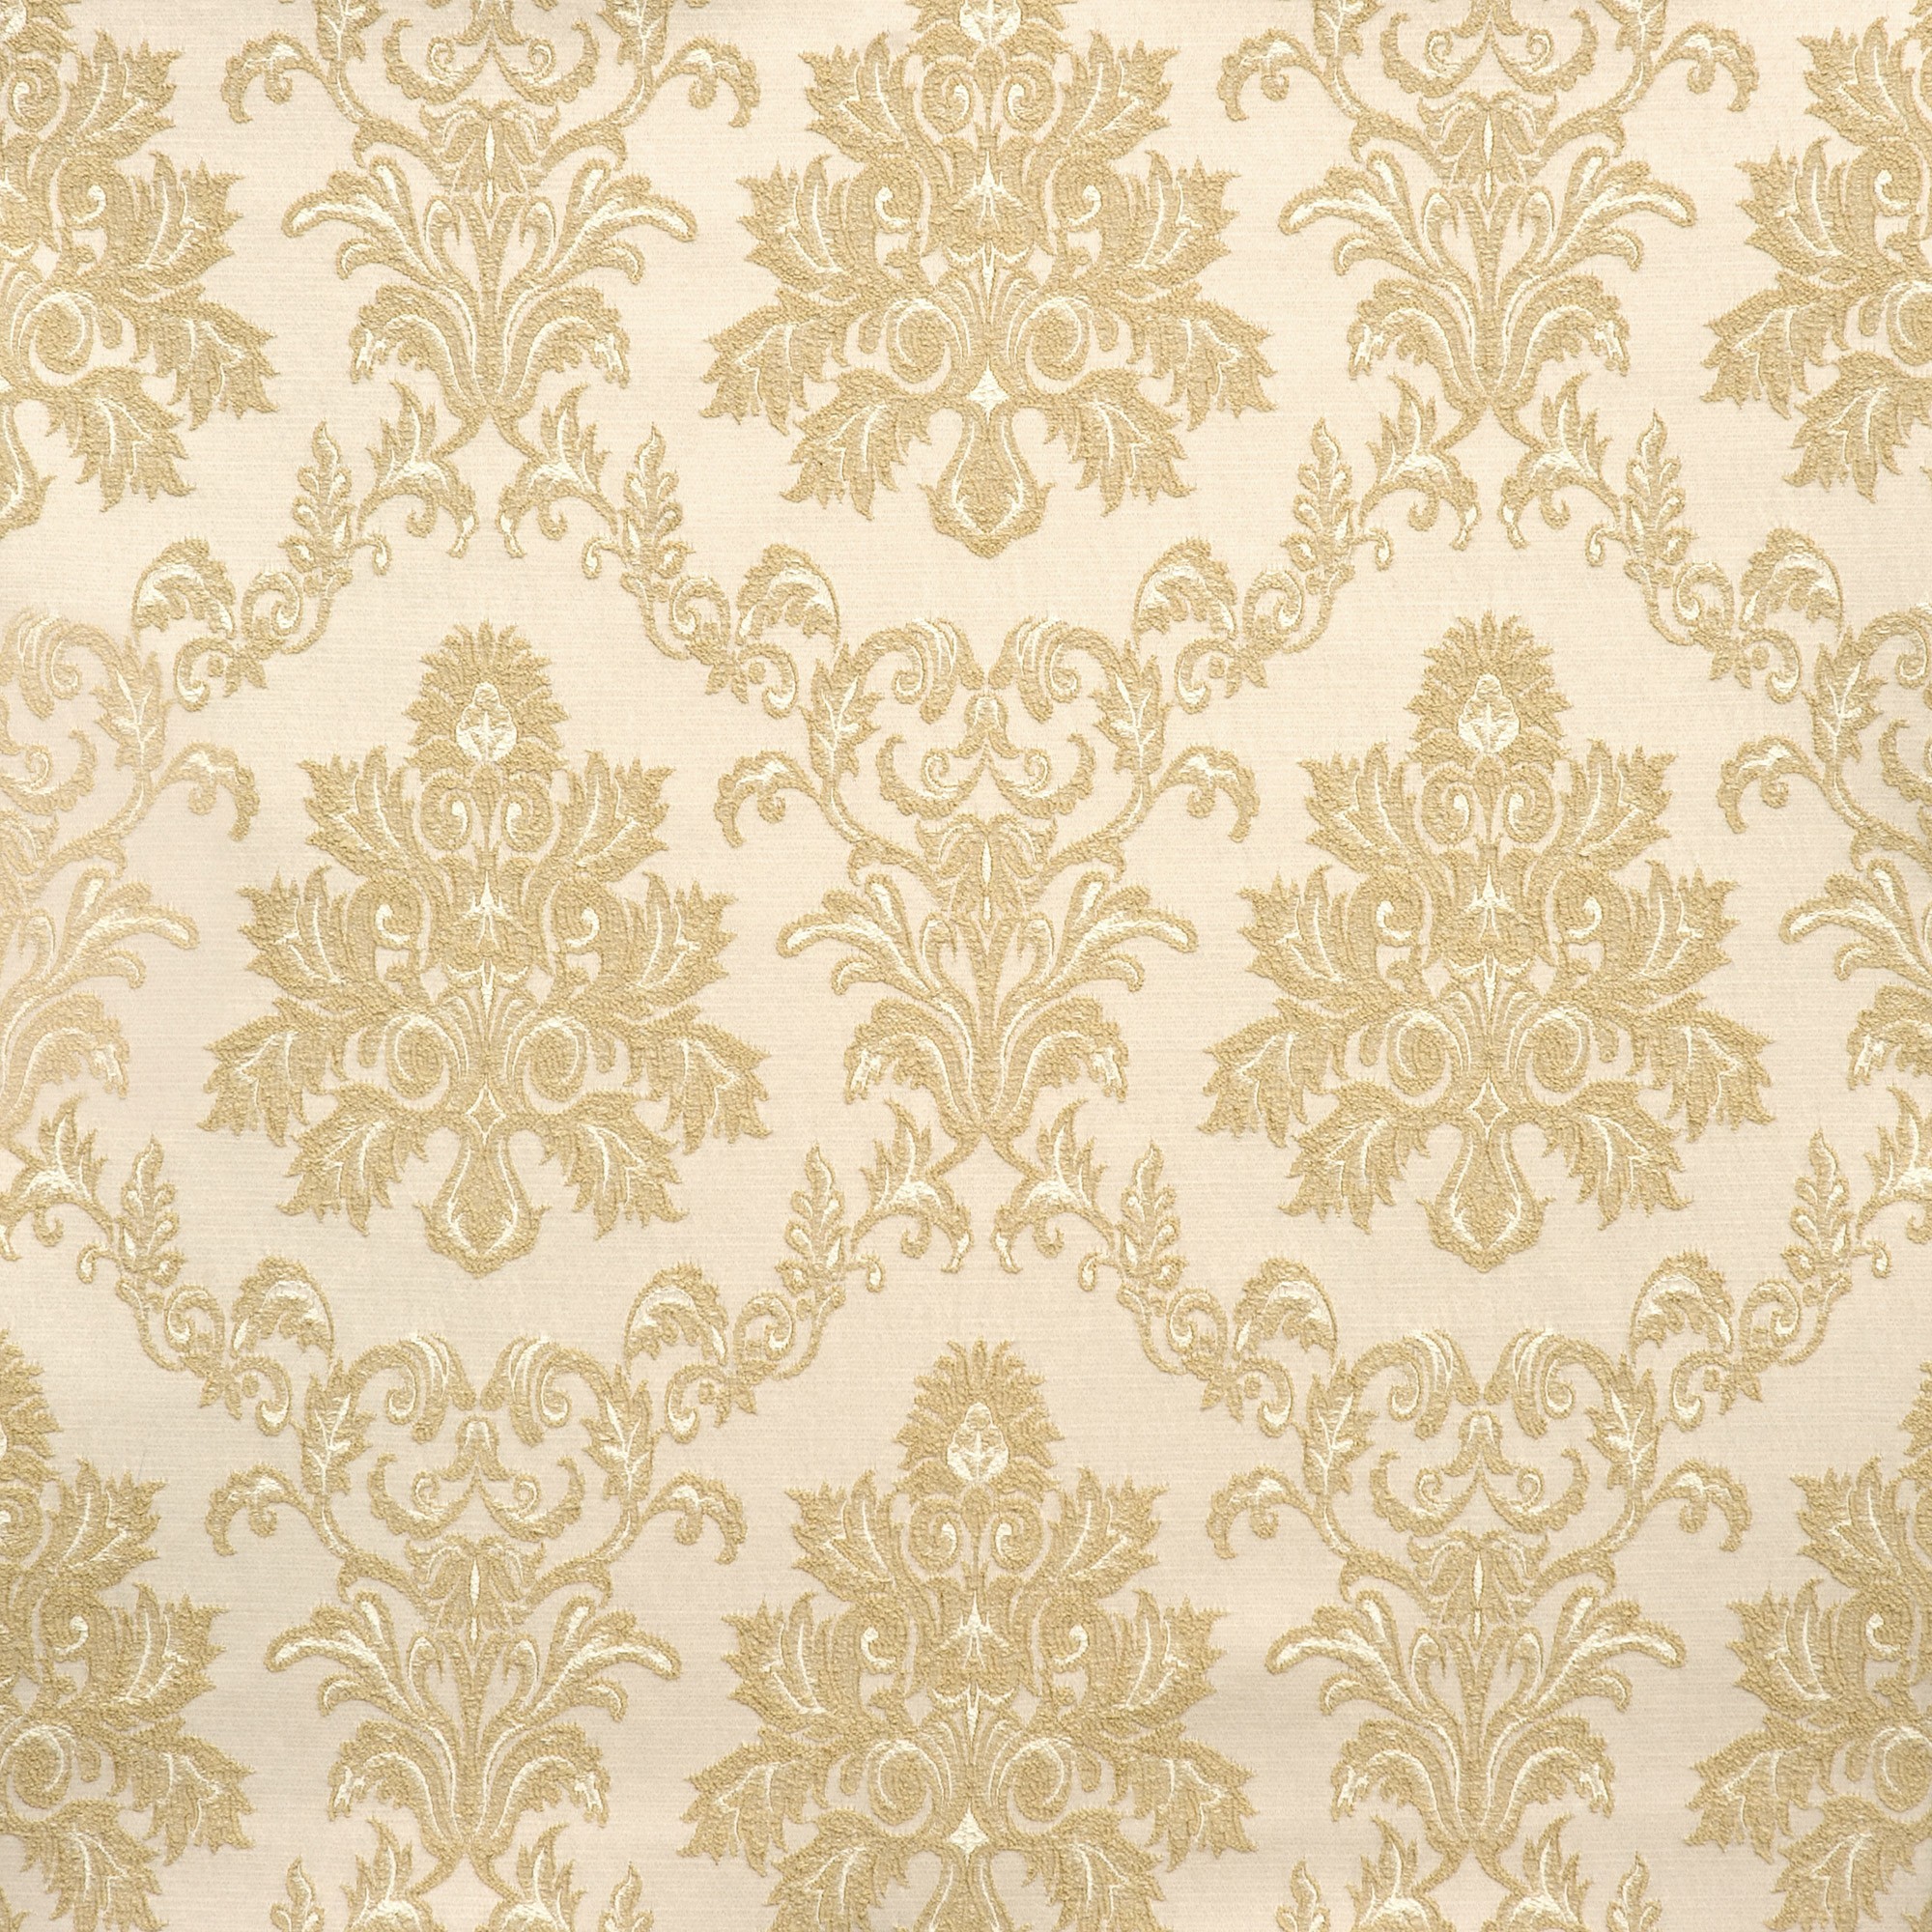 Gold Damask Wallpaper Quotes